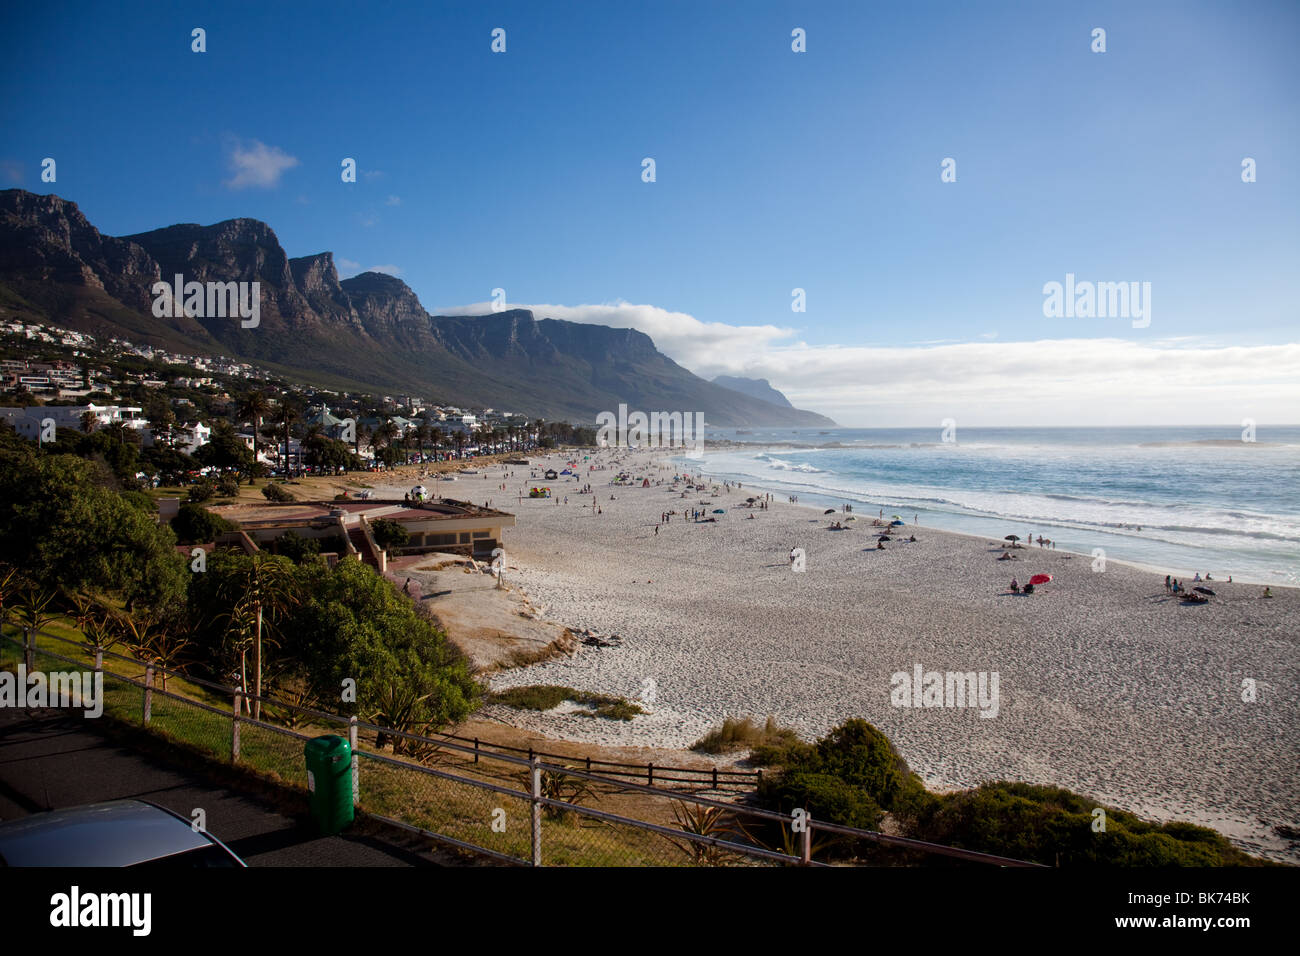 Panoramic view over the beach of Camps Bay near Cape town, South Africa Stock Photo